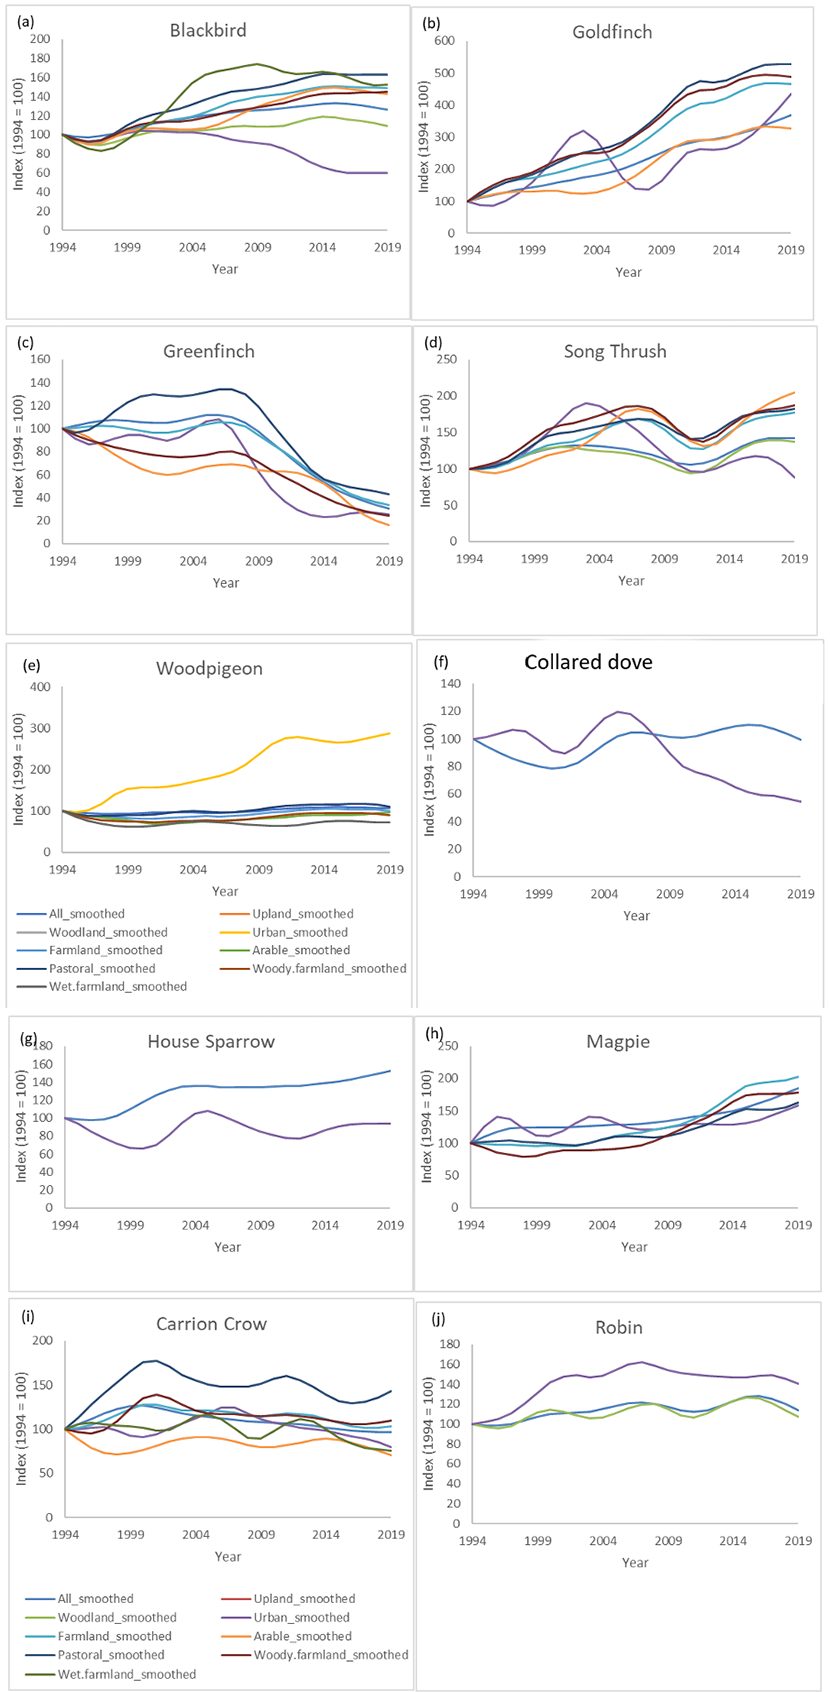 Line graphs showing smoothed trends for carrion crow, robin, magpie, house sparrow, blackbird, goldfinch, greenfinch, song thrush, wood pigeon and collared dove